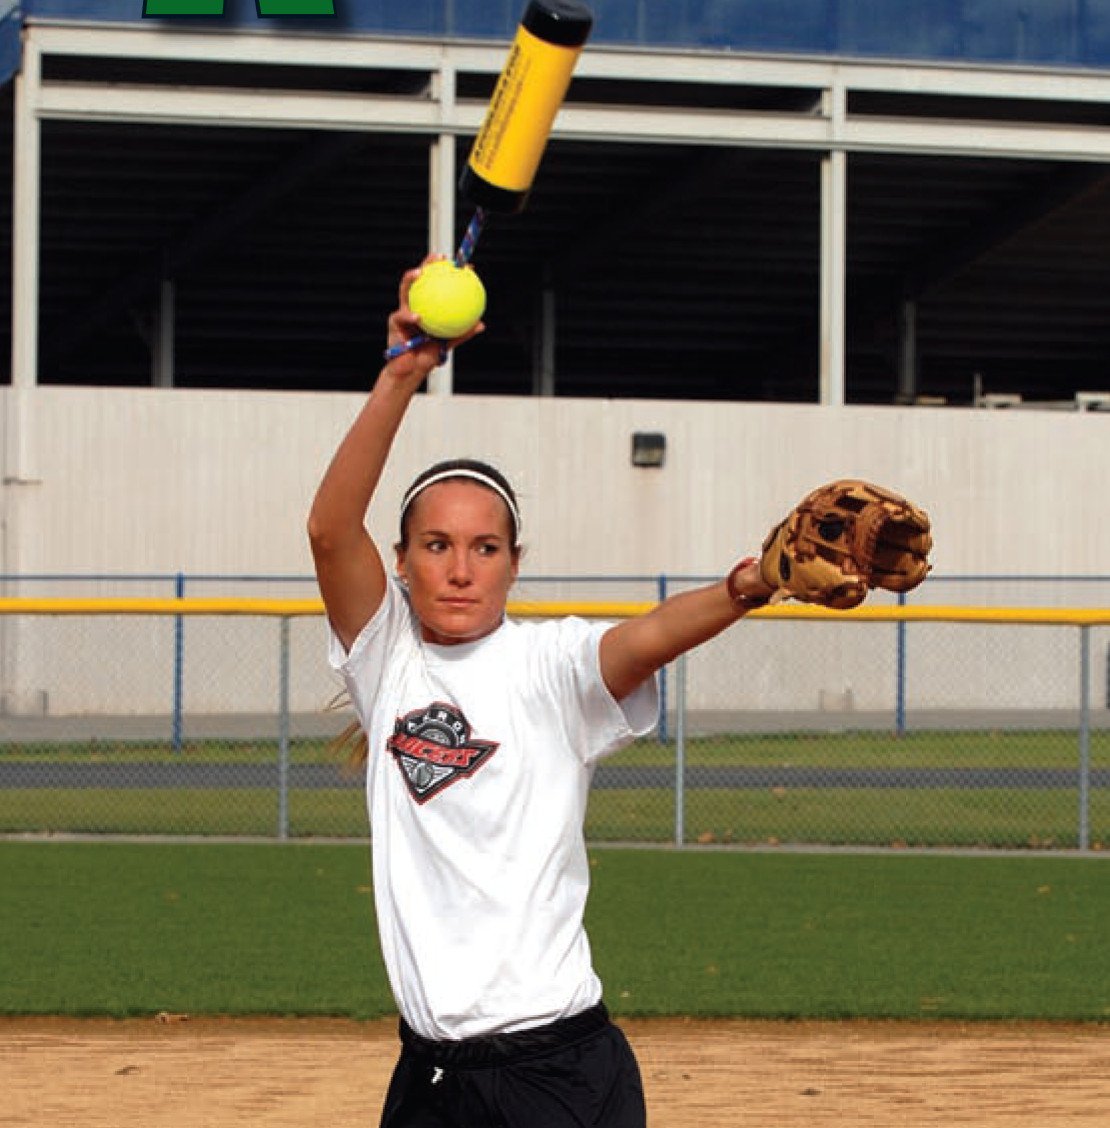 XELERATOR THE CANNONBALL Fastpitch Softball Pitching Training Aids 